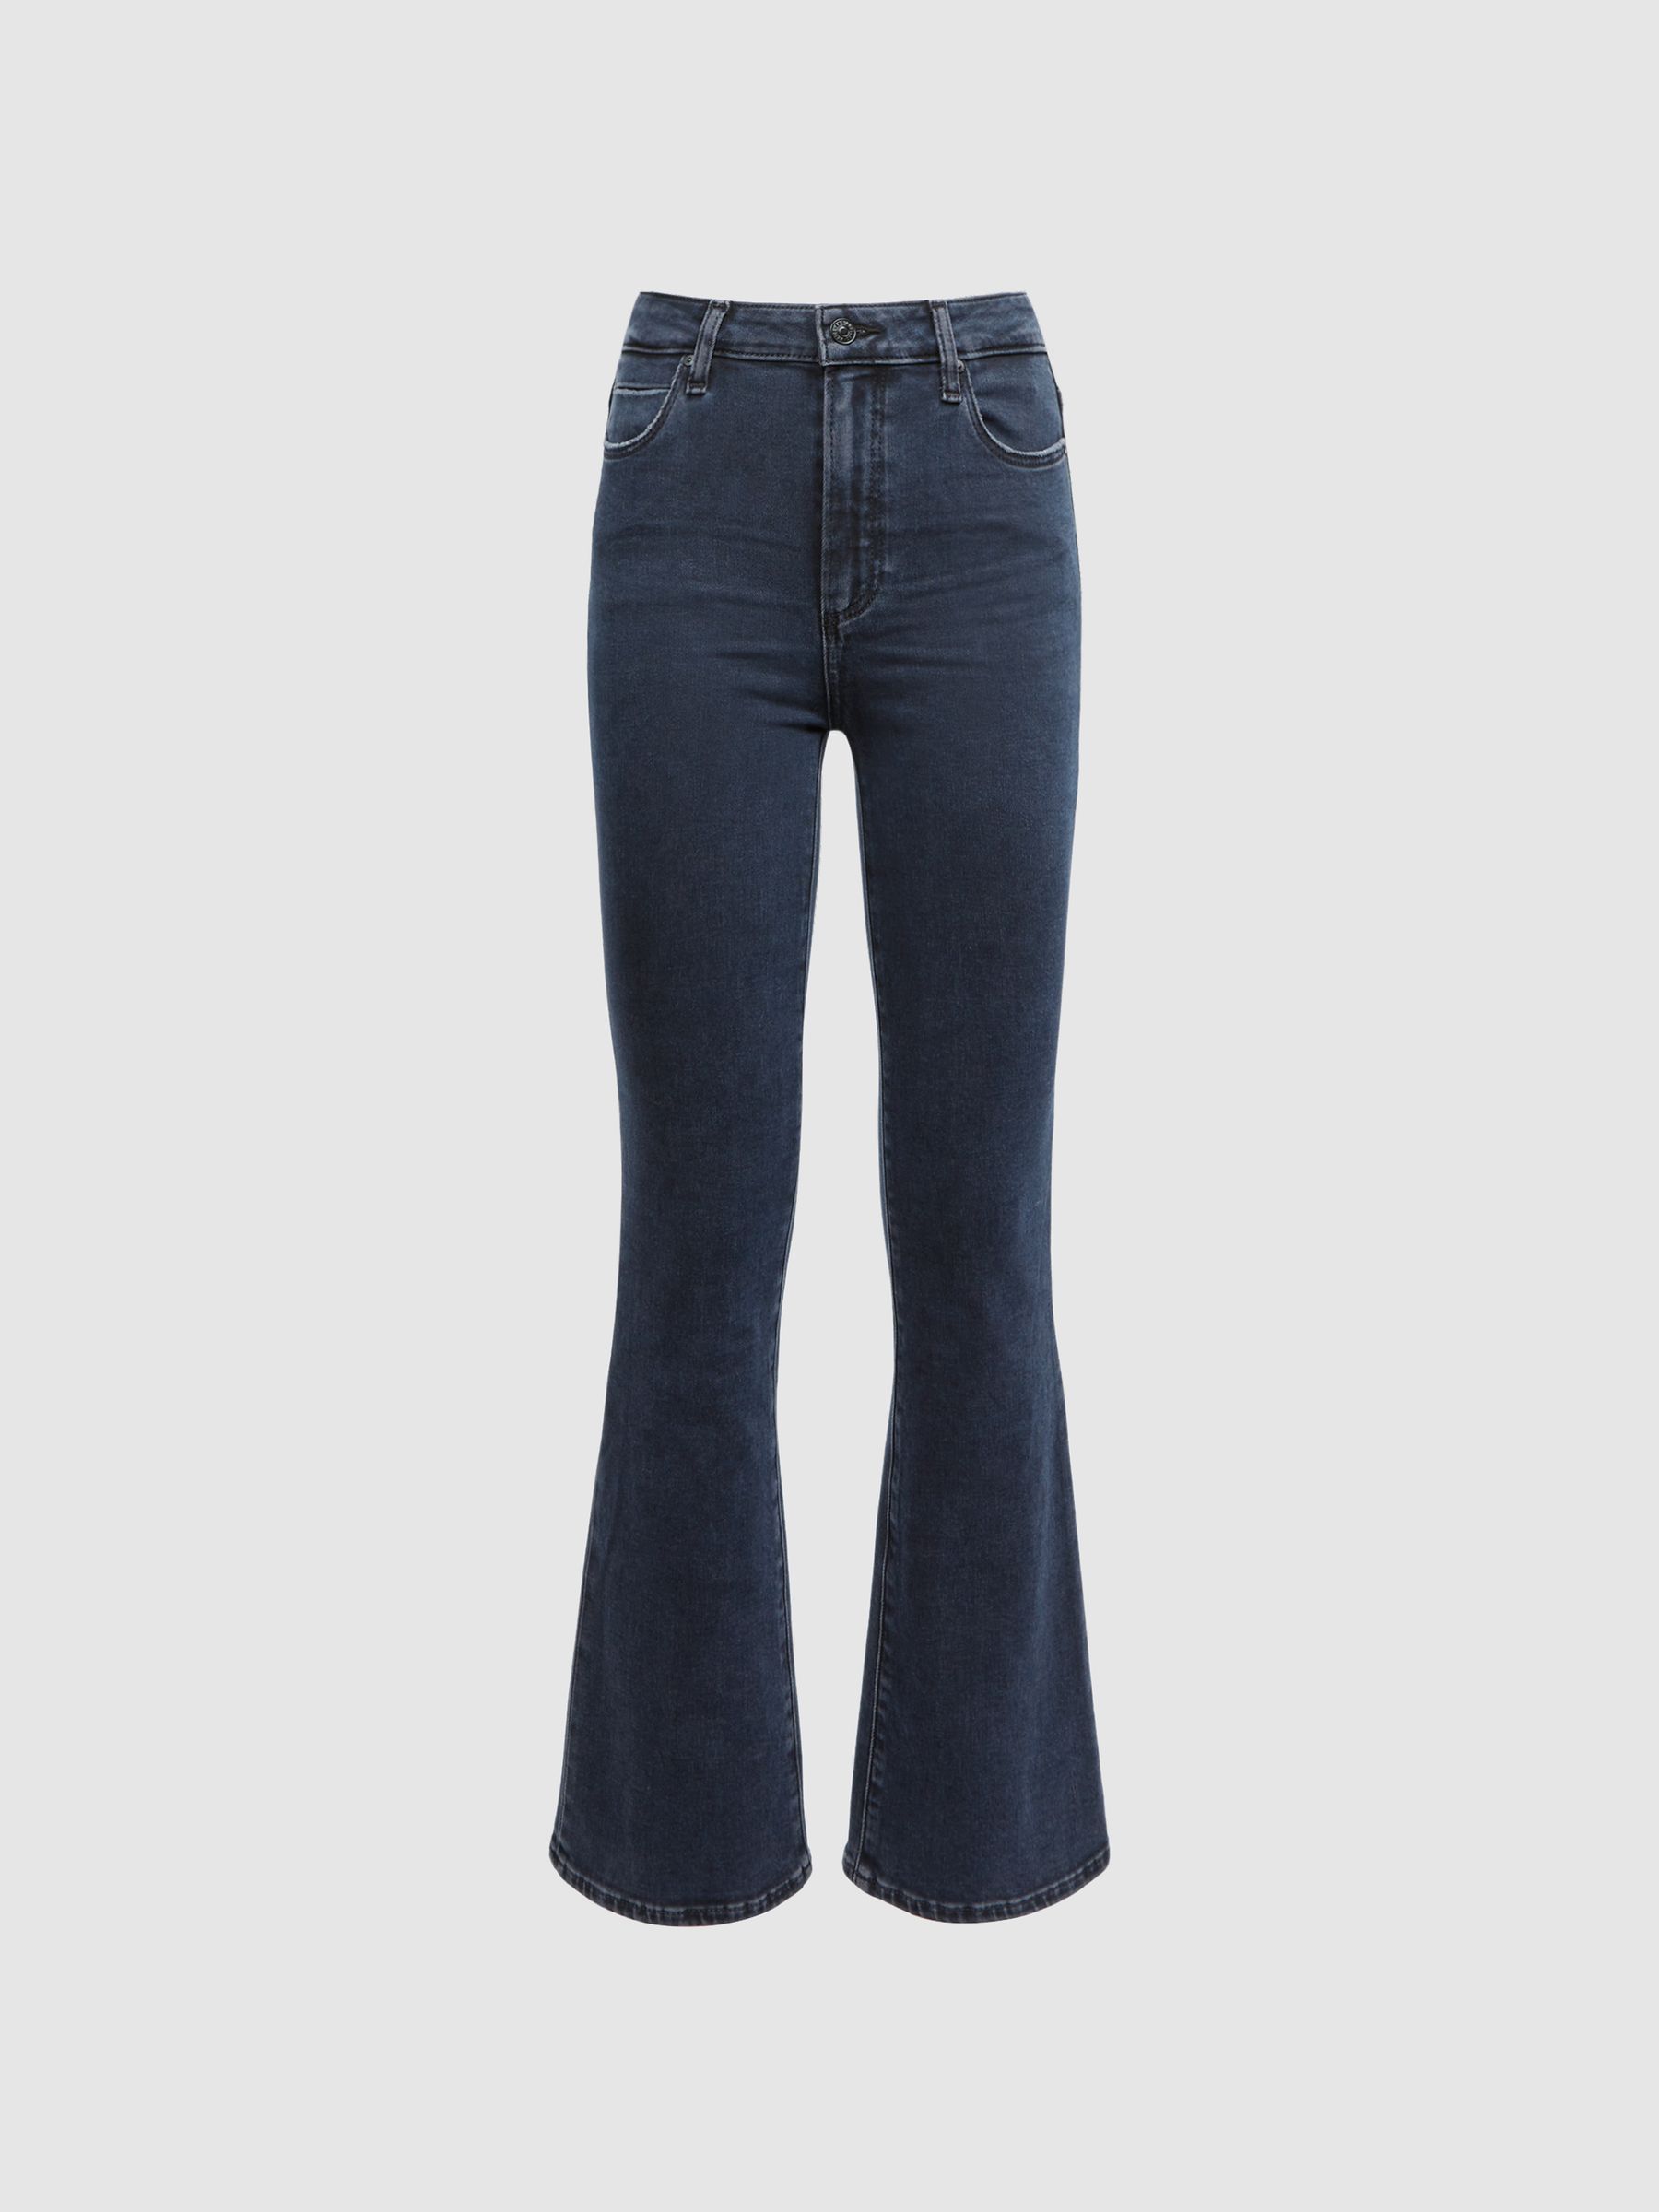 Reiss Claudine Paige High Rise Flared Jeans - REISS